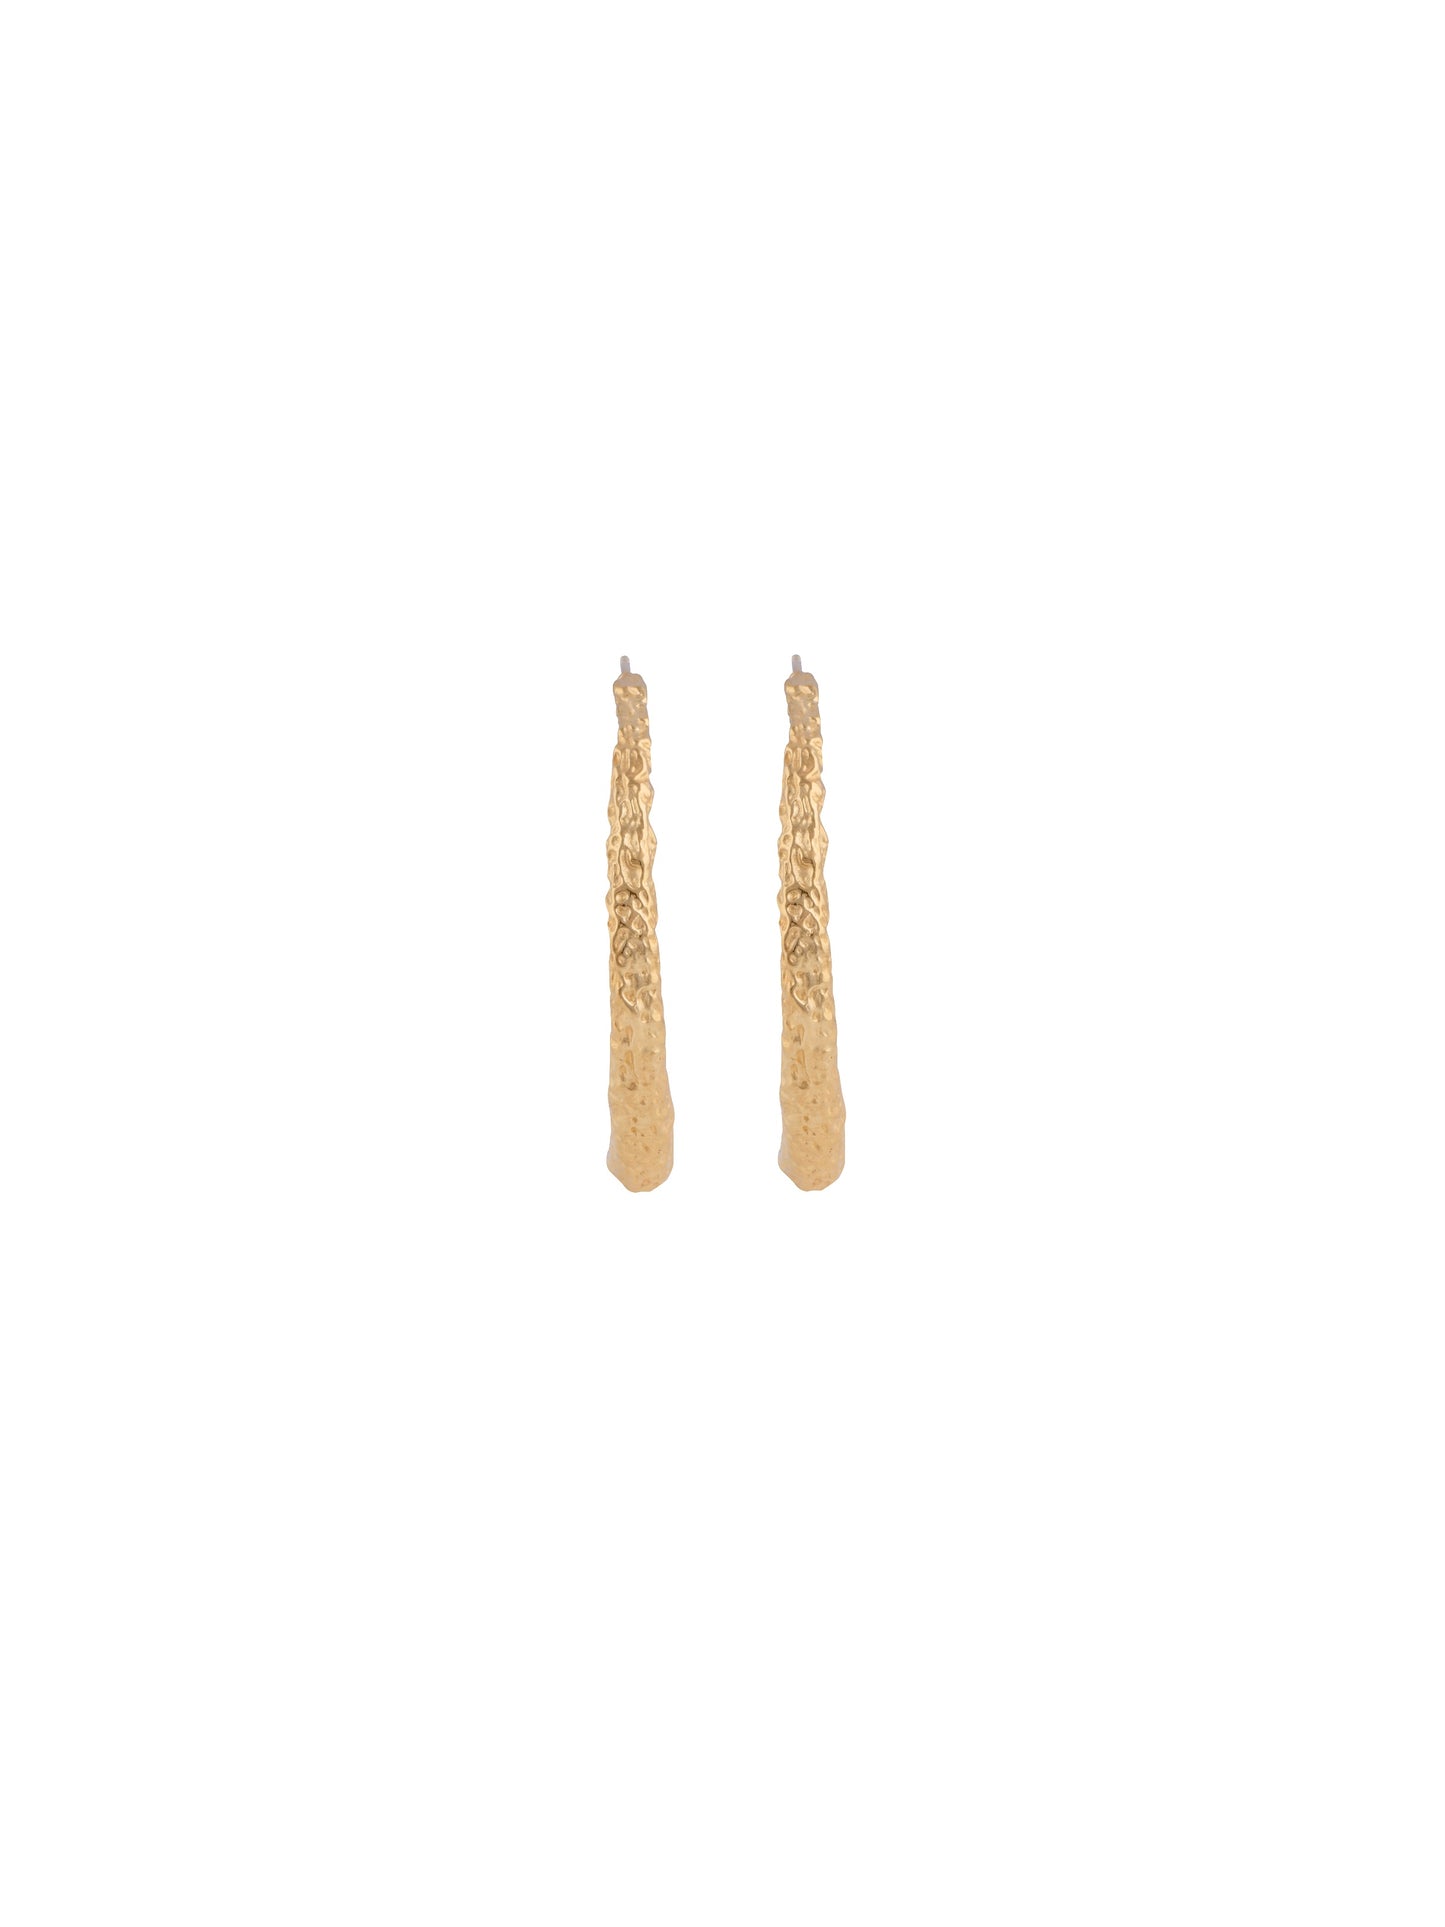 Gold earrings - Exquisite jewelry for adding elegance and charm to any outfit.